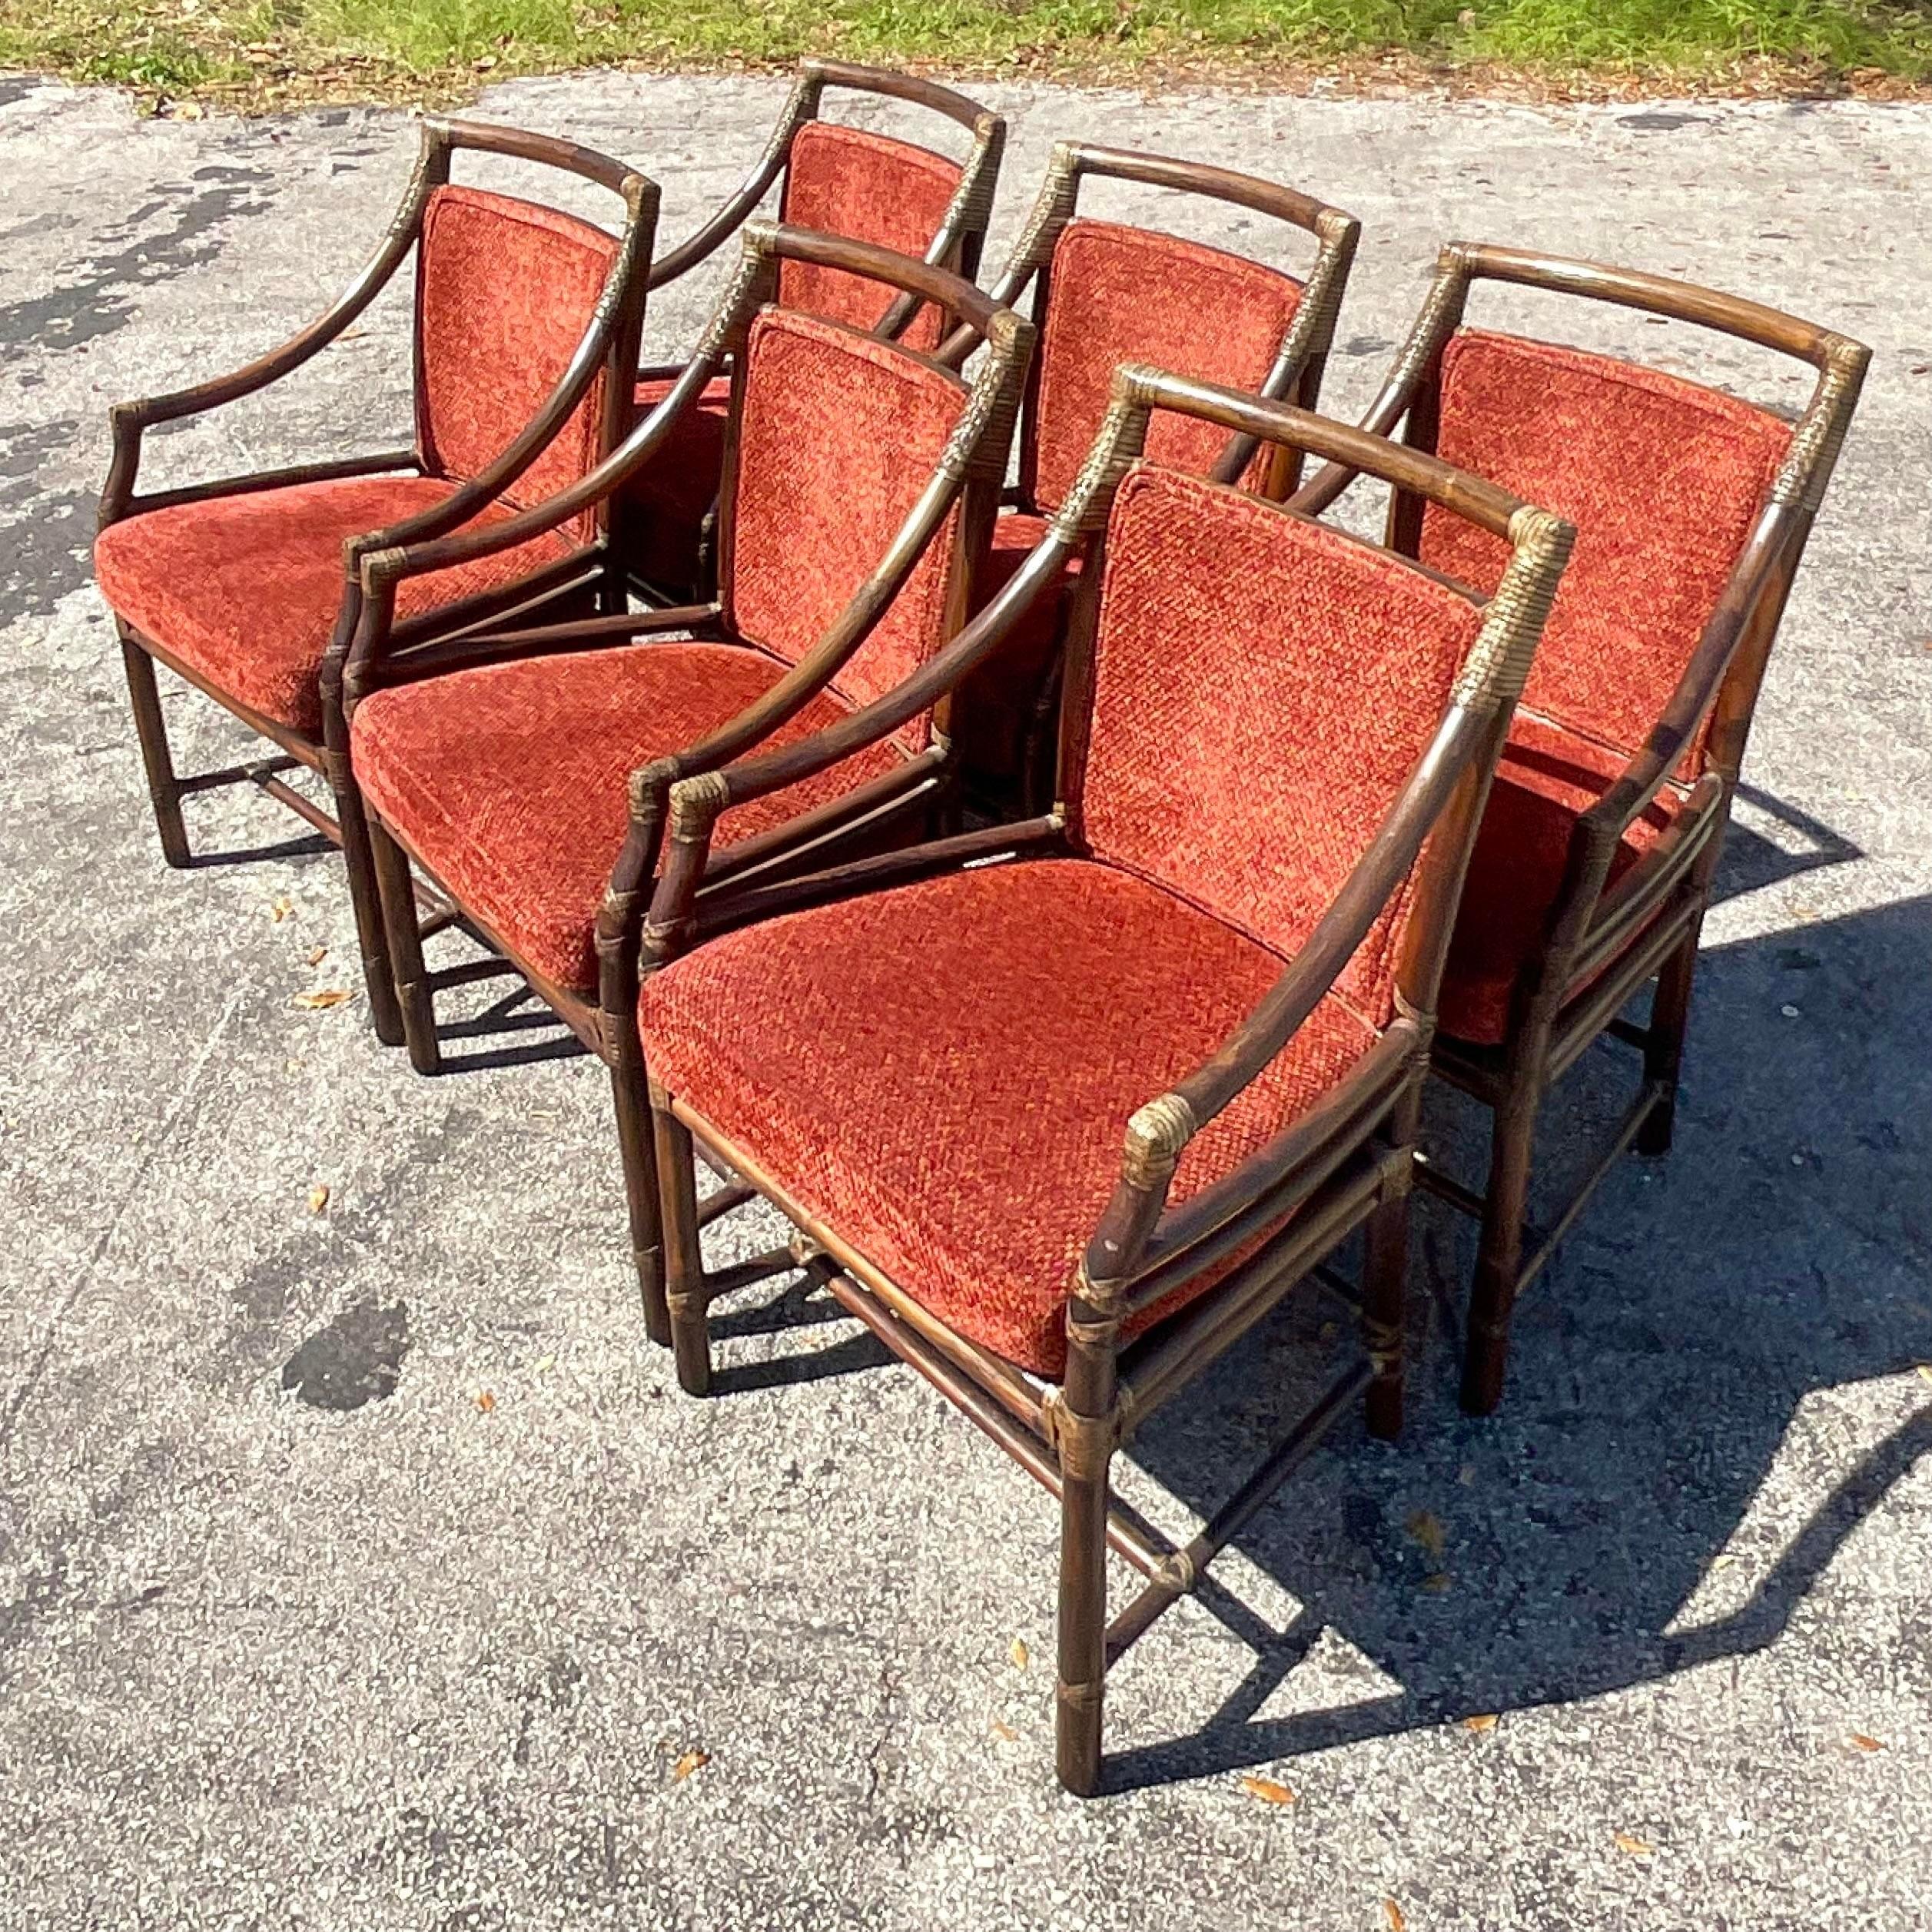 Upholstery Vintage Coastal McGuire Target Back Dining Chairs - Set of 6